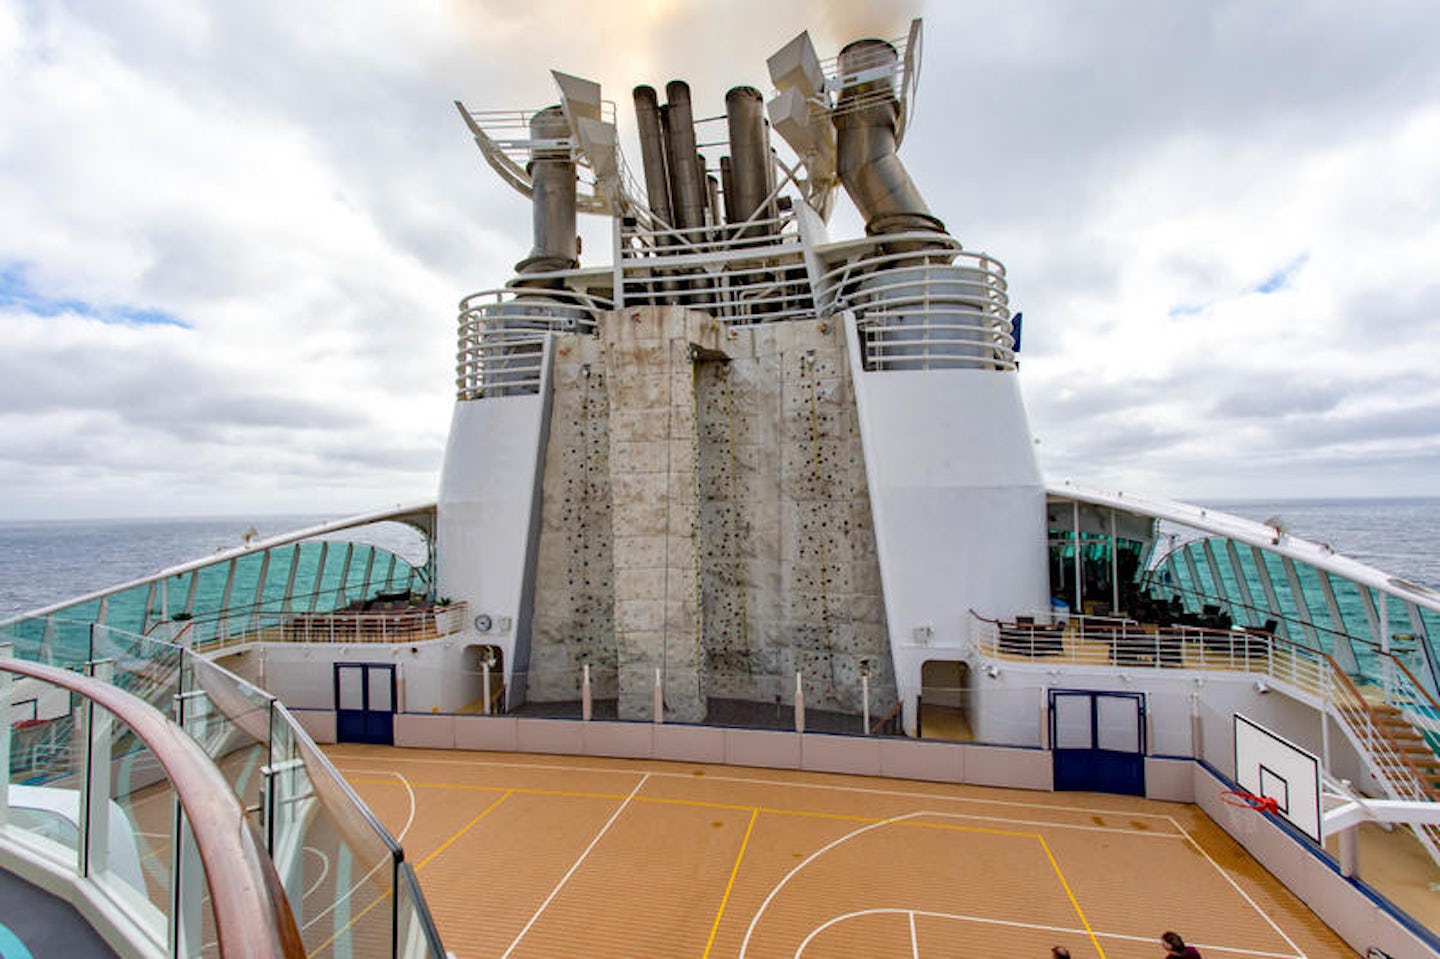 Rock Climbing Wall on Independence of the Seas